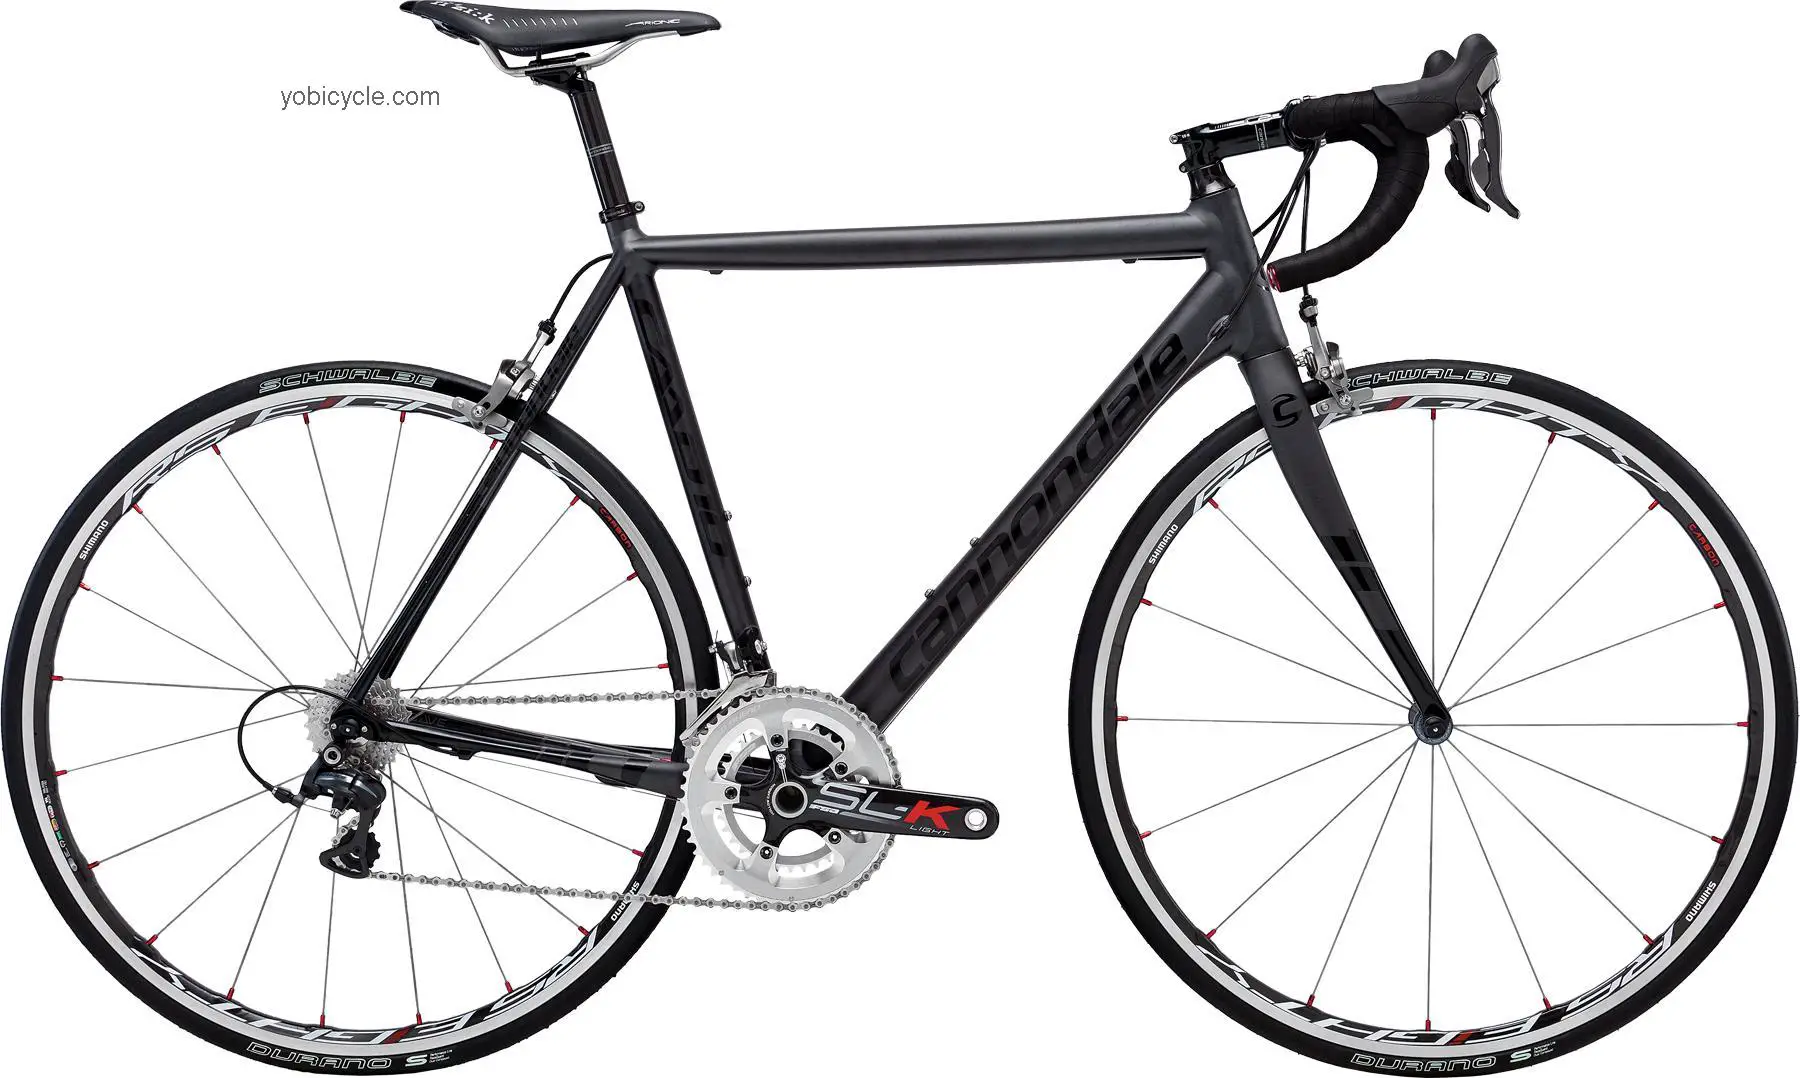 Cannondale CAAD10 1 Dura-Ace 2012 comparison online with competitors